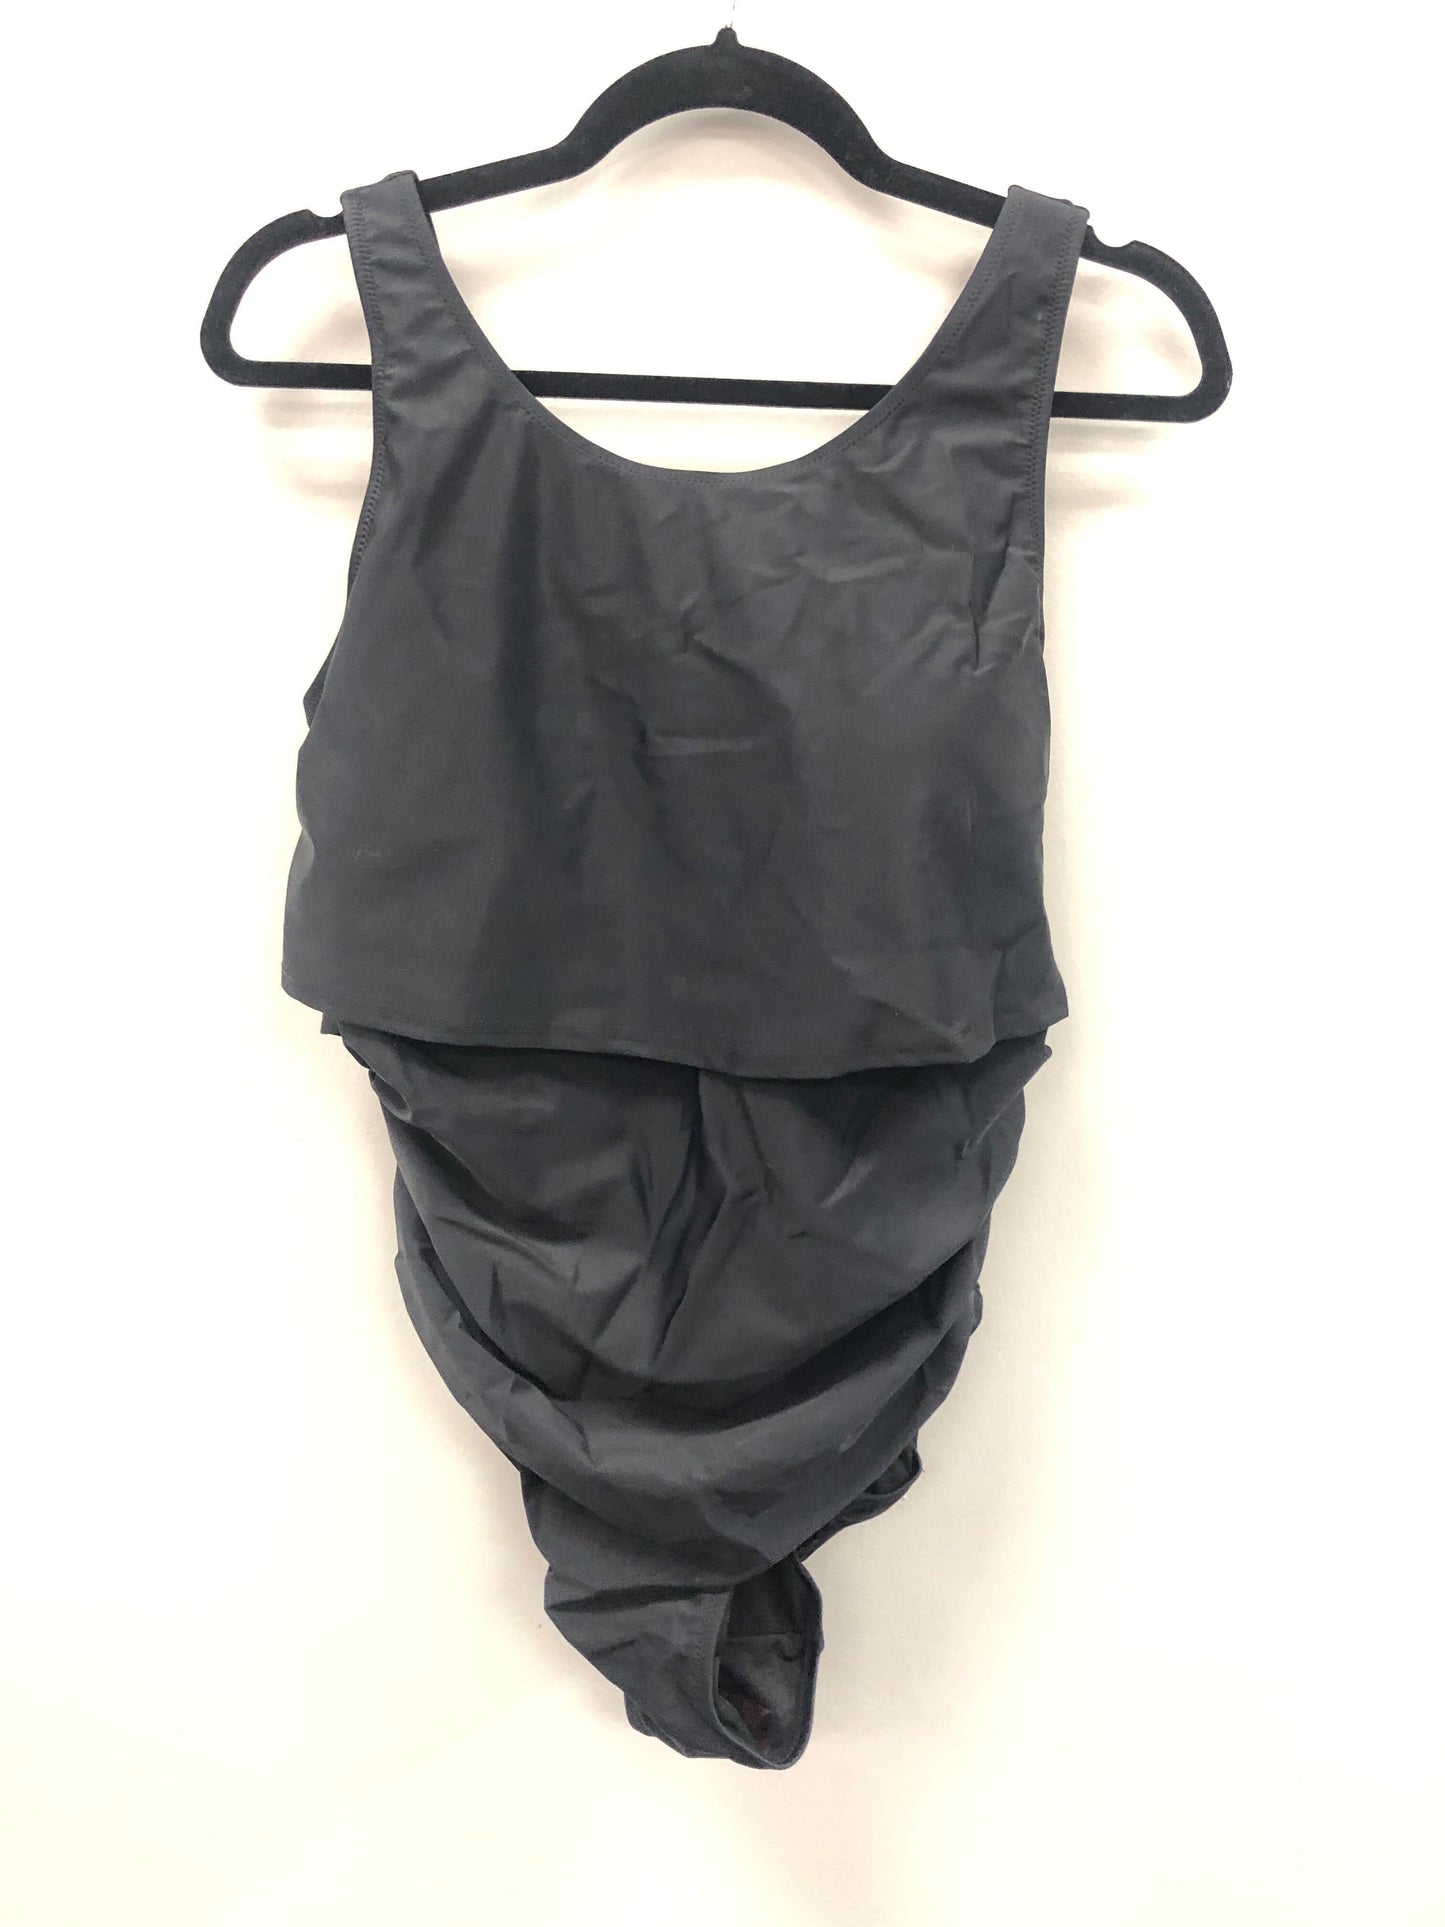 Outlet 5819 - Latched Mama Tie Back Nursing Swim One Piece - Black - Extra Large